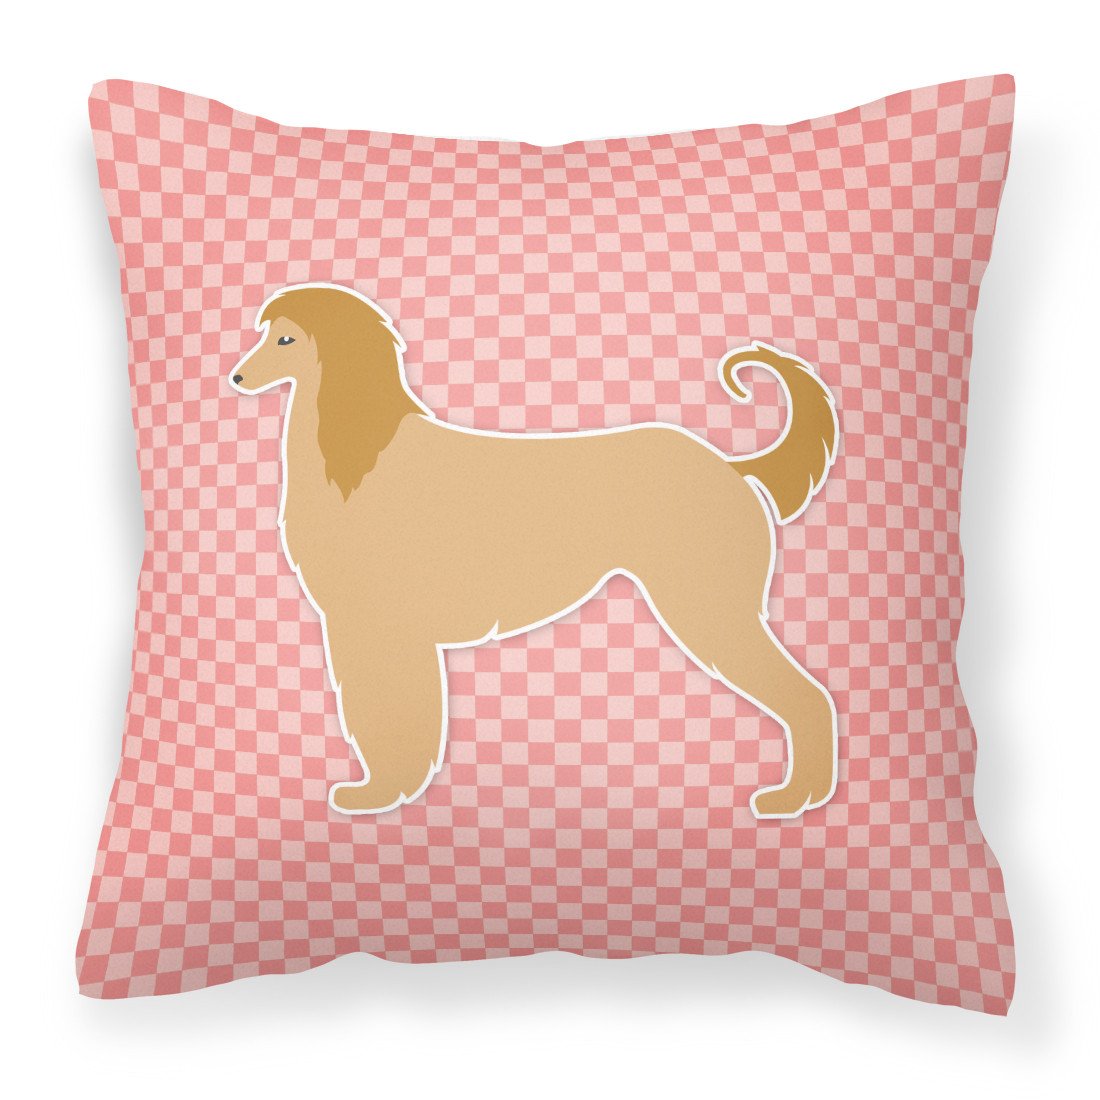 Afghan Hound Checkerboard Pink Fabric Decorative Pillow BB3606PW1818 by Caroline's Treasures